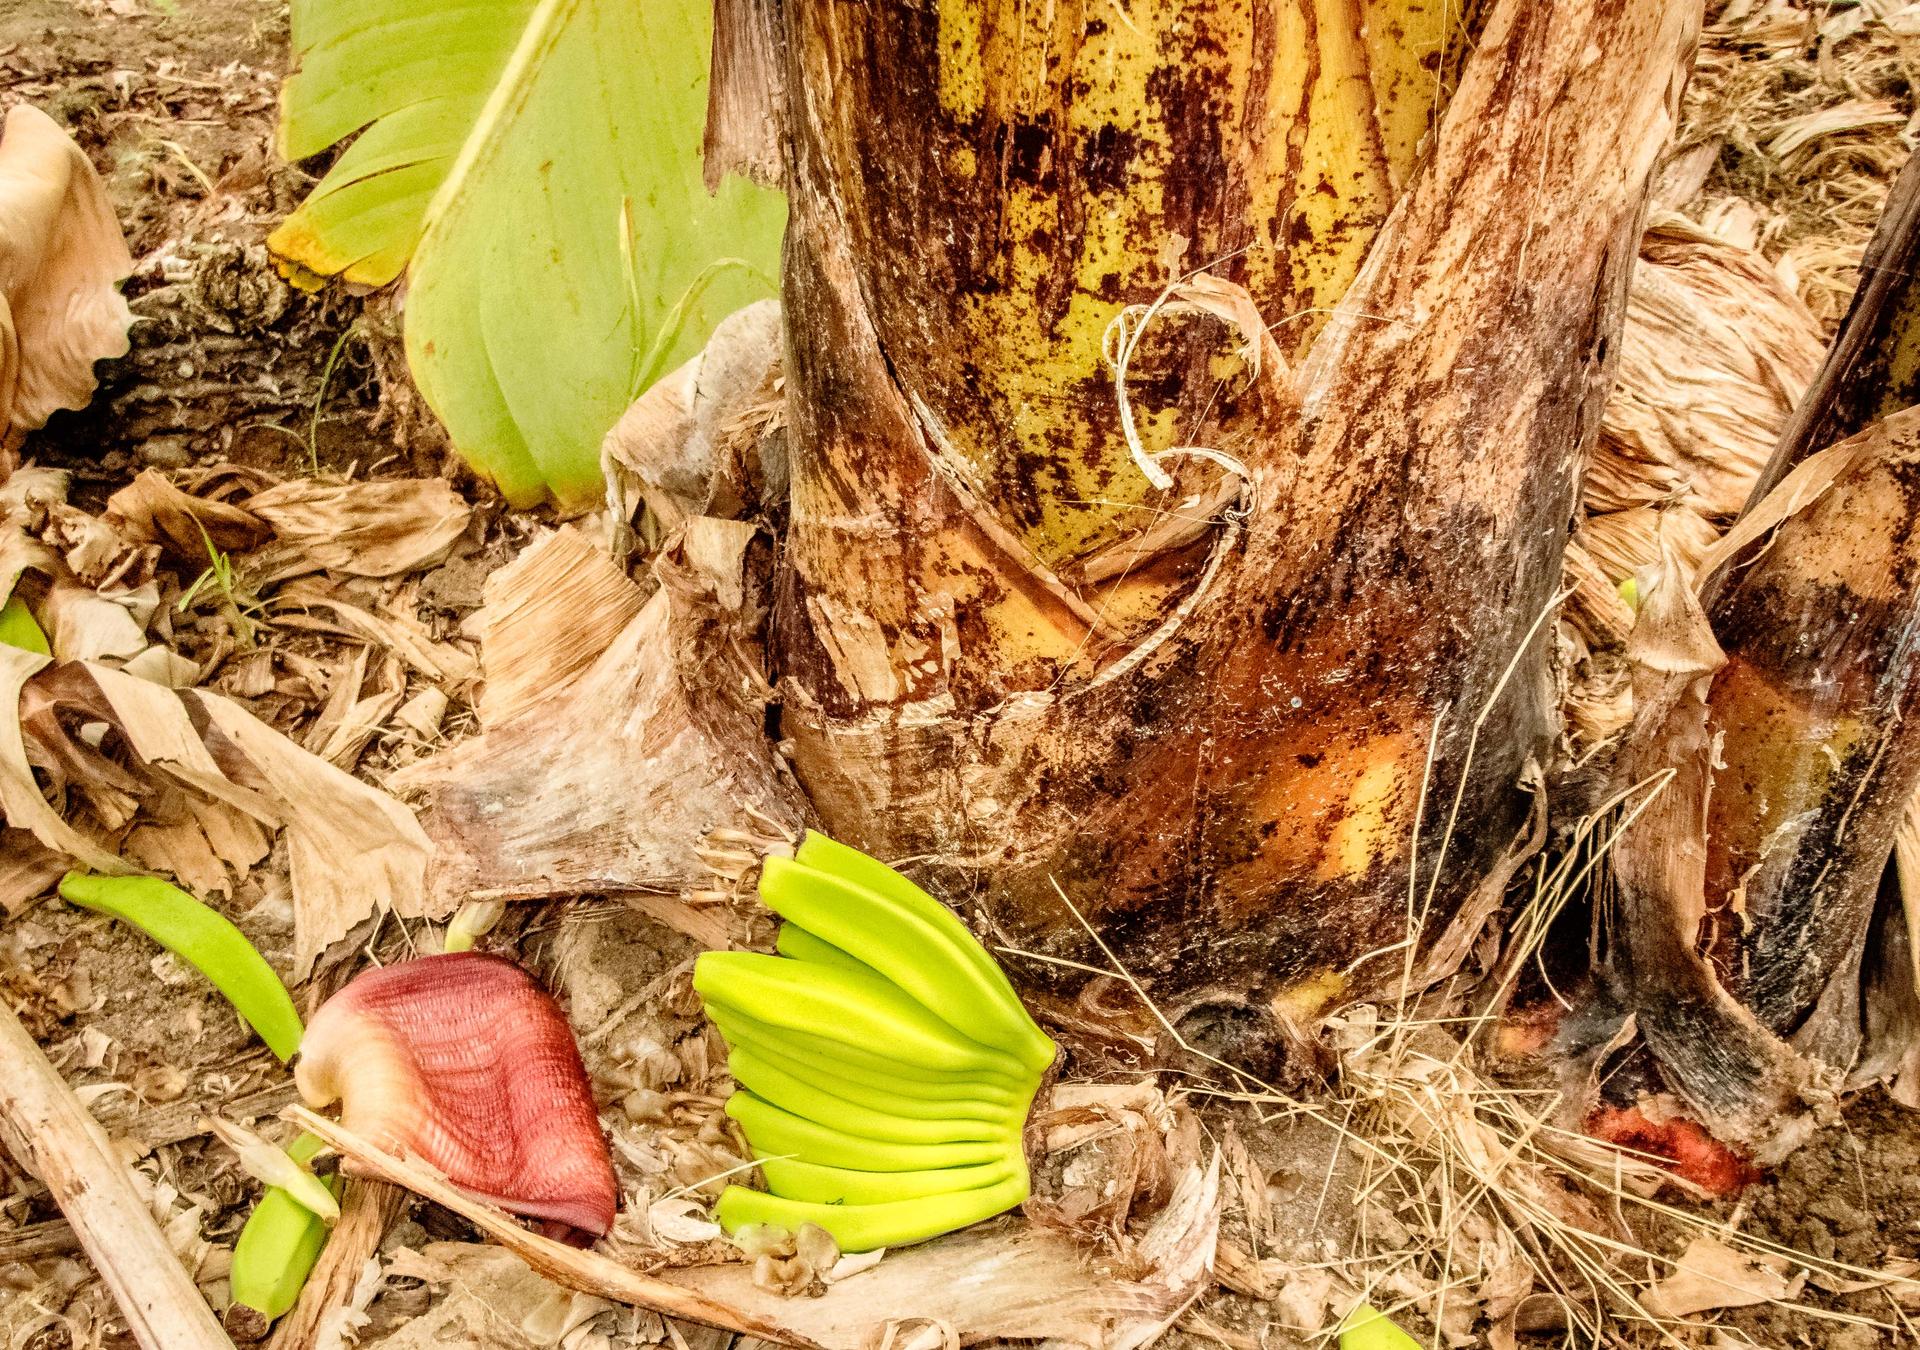 Organic banana trees are not producing bananas fit for export due to extreme weather changes in Piura, Peru.